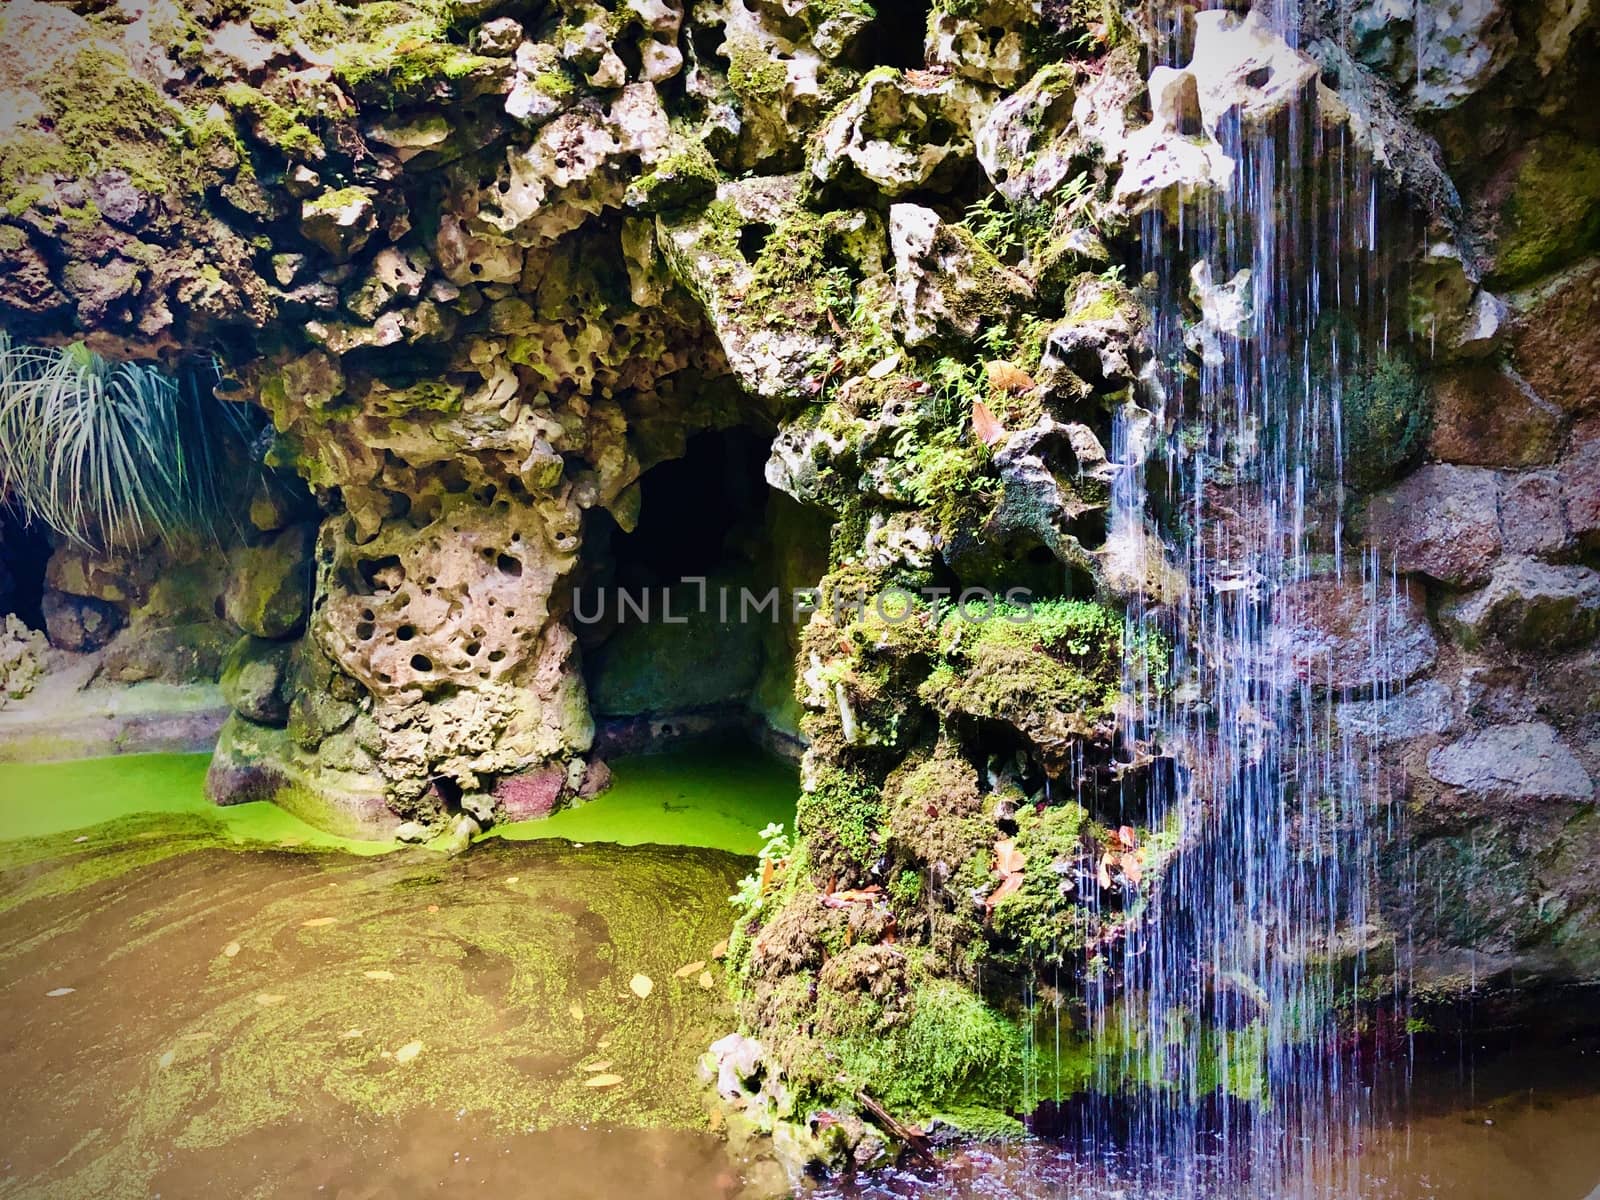 Waterfall in a swamp and caves in the rocks in a bright day